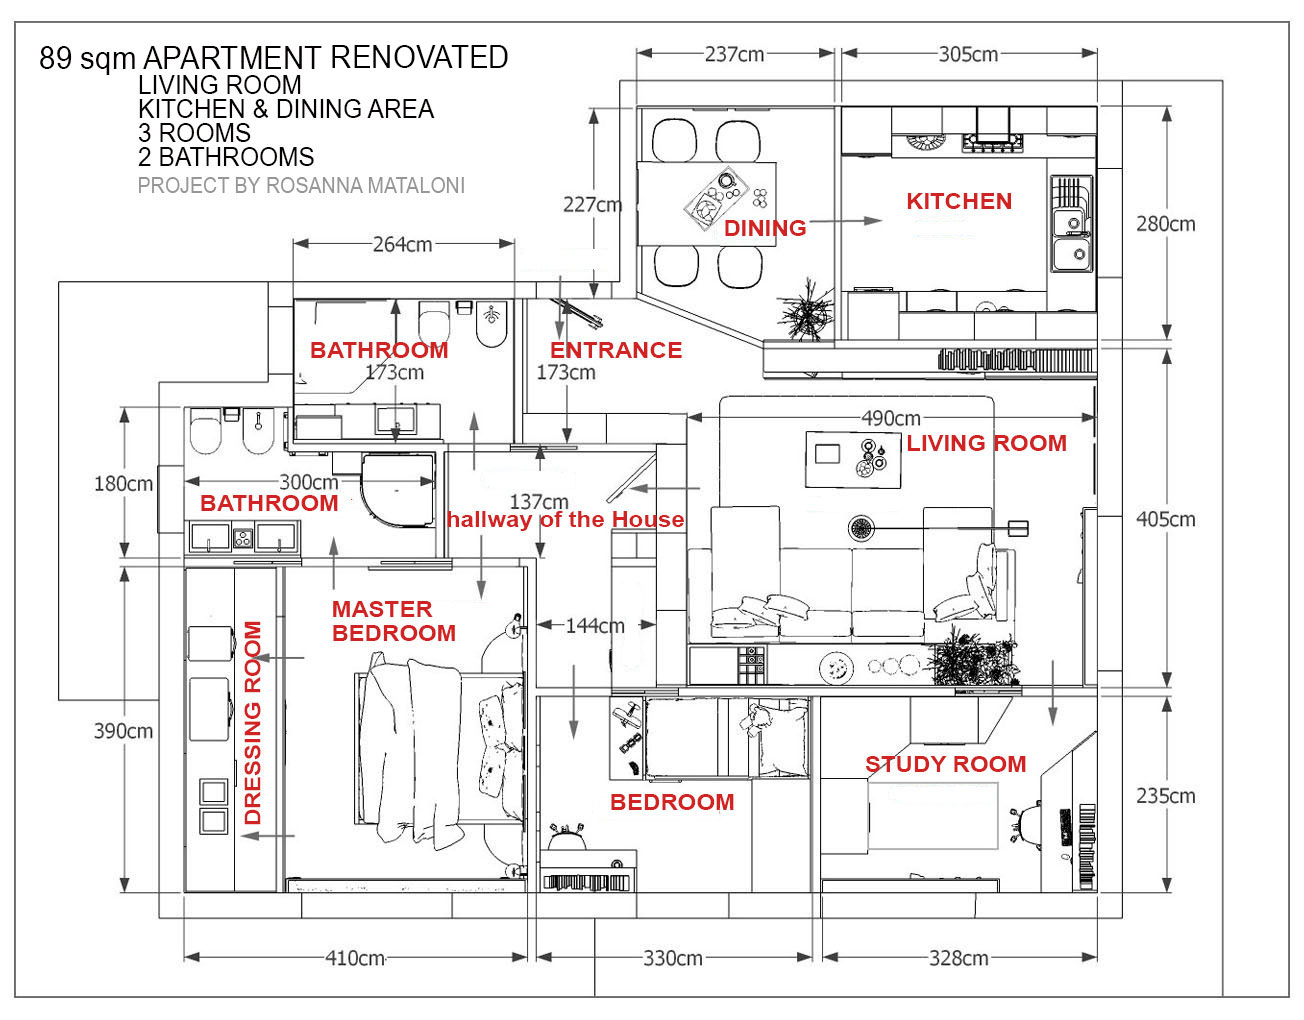 2d layout renovated apartment 89 m square after